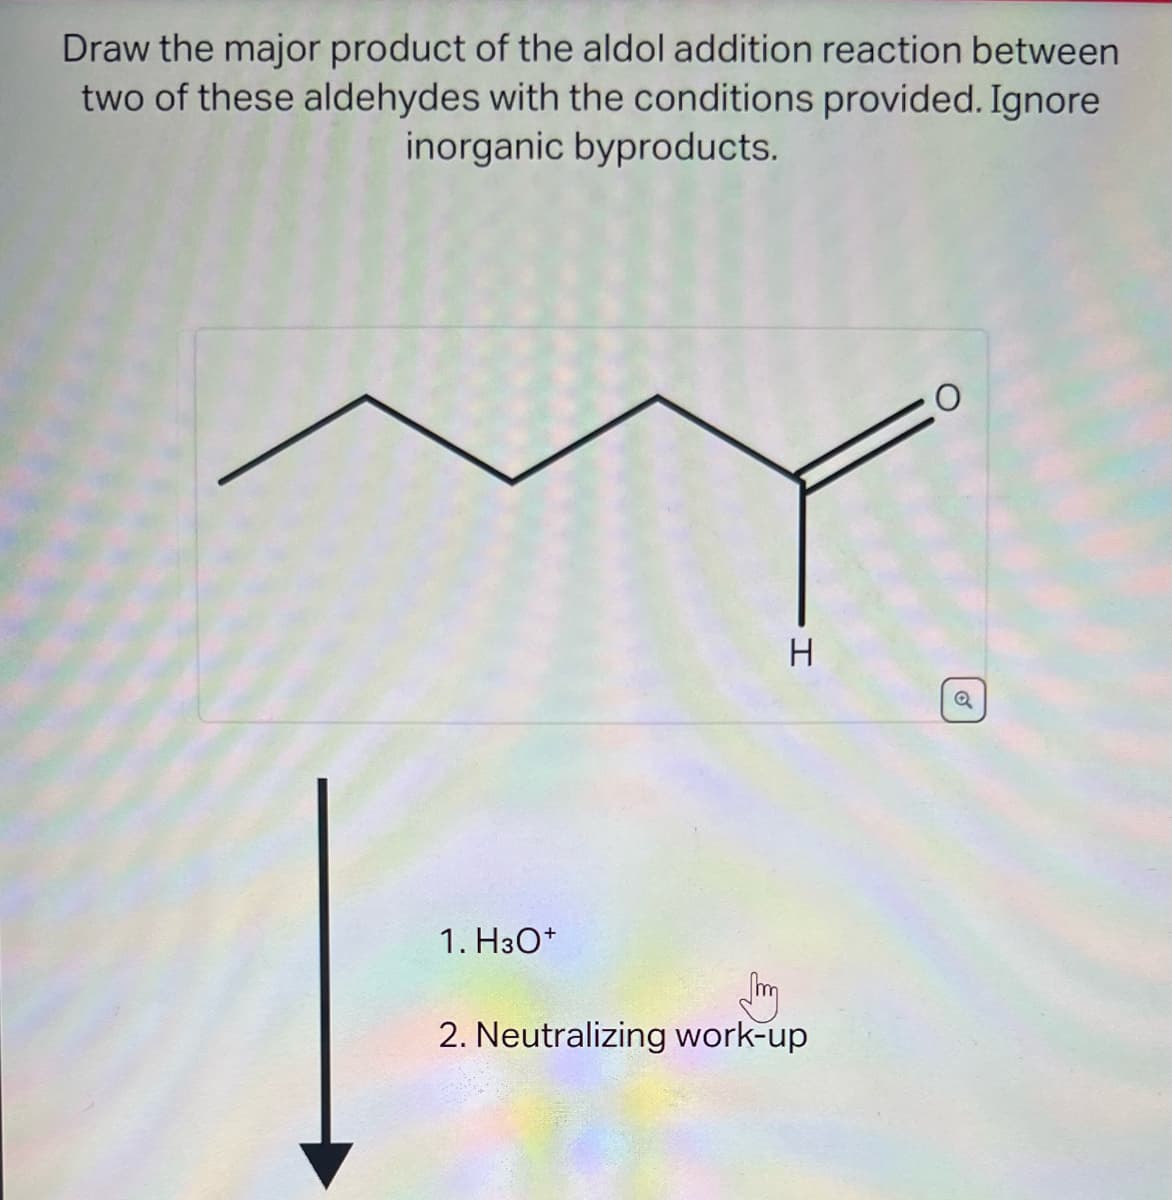 Draw the major product of the aldol addition reaction between
two of these aldehydes with the conditions provided. Ignore
inorganic byproducts.
1. H3O+
H
2. Neutralizing work-up
O
Q